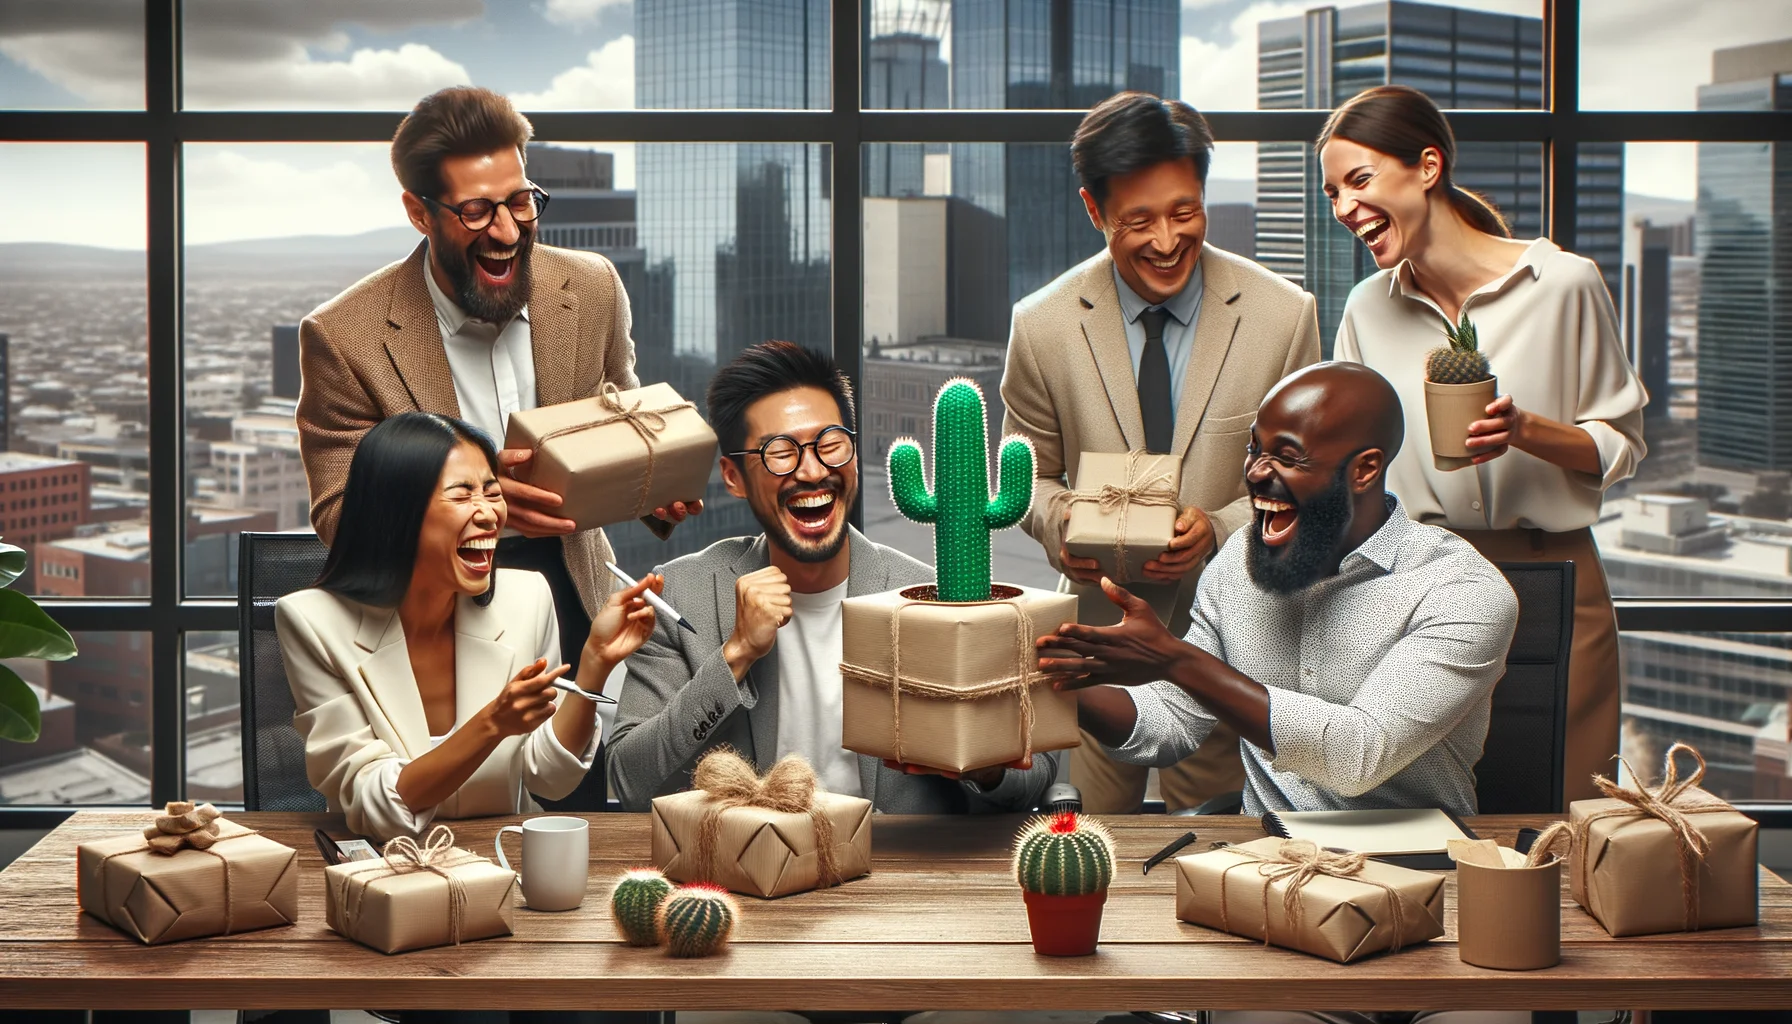 Create a humorously realistic image showing the perfect corporate gifting scenario. Picture this, there are five colleagues from different descents - a South Asian woman, a Hispanic man, a Middle-Eastern woman, a Caucasian man, and a Black man - laughing as they exchange creatively wrapped gifts. The setting is a modern, well-lit office with large glass windows showing a cityscape in the background. They're all wearing semi-professional attire. The gifts are wildly diverse - from a potted cactus to a novelty-sized coffee mug. Capture the joy, surprises, and the vibe of camaraderie in the tableau.